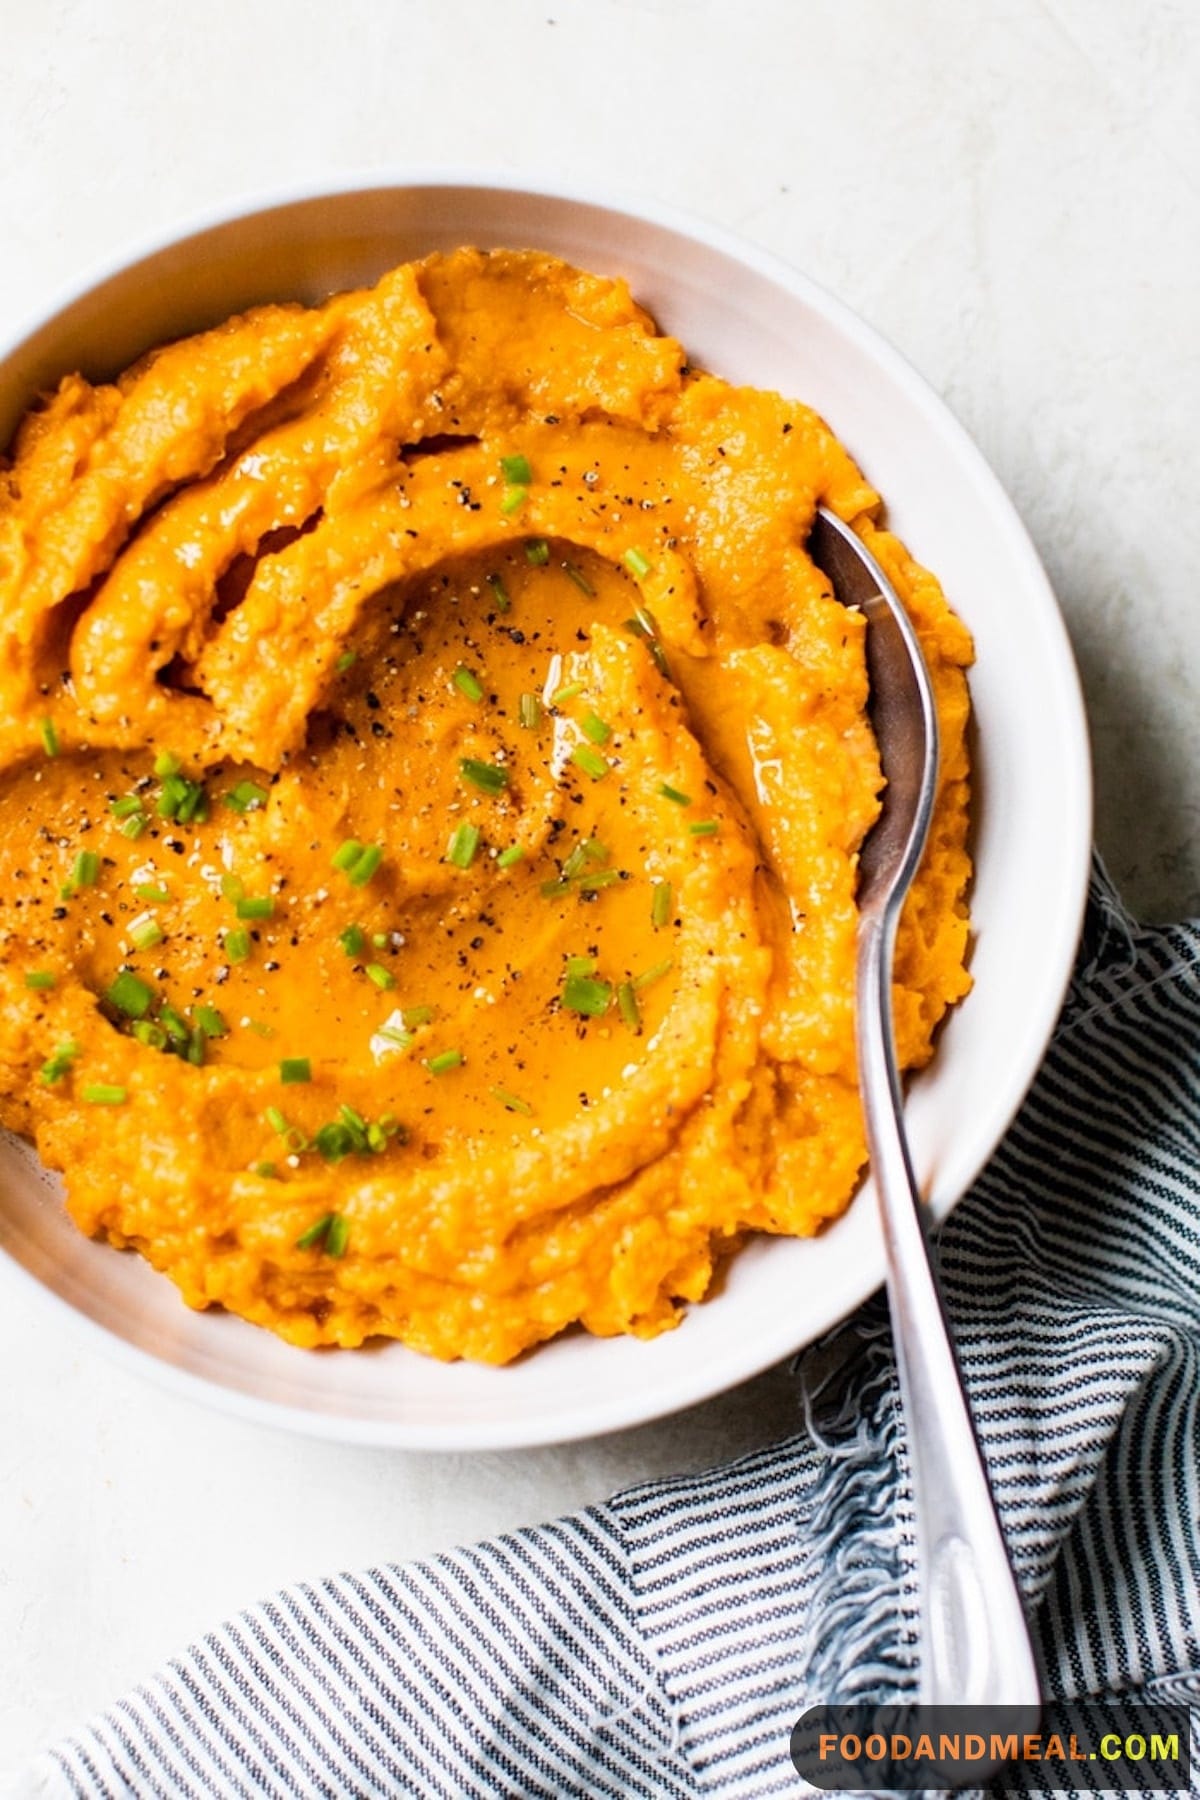 Mashed Yams With Salt And Pepper